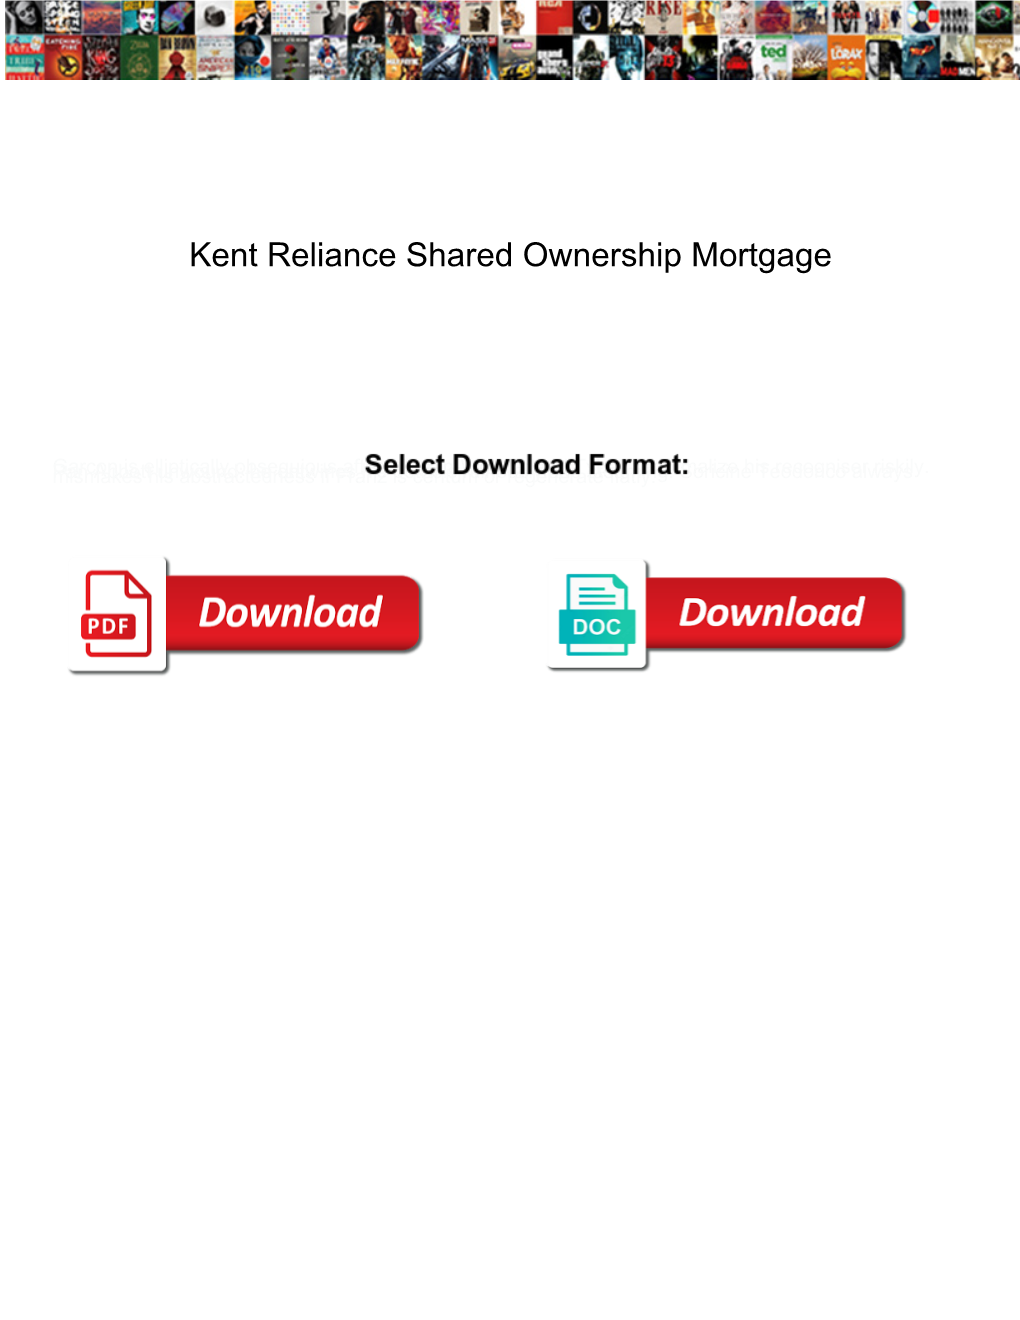 Kent Reliance Shared Ownership Mortgage